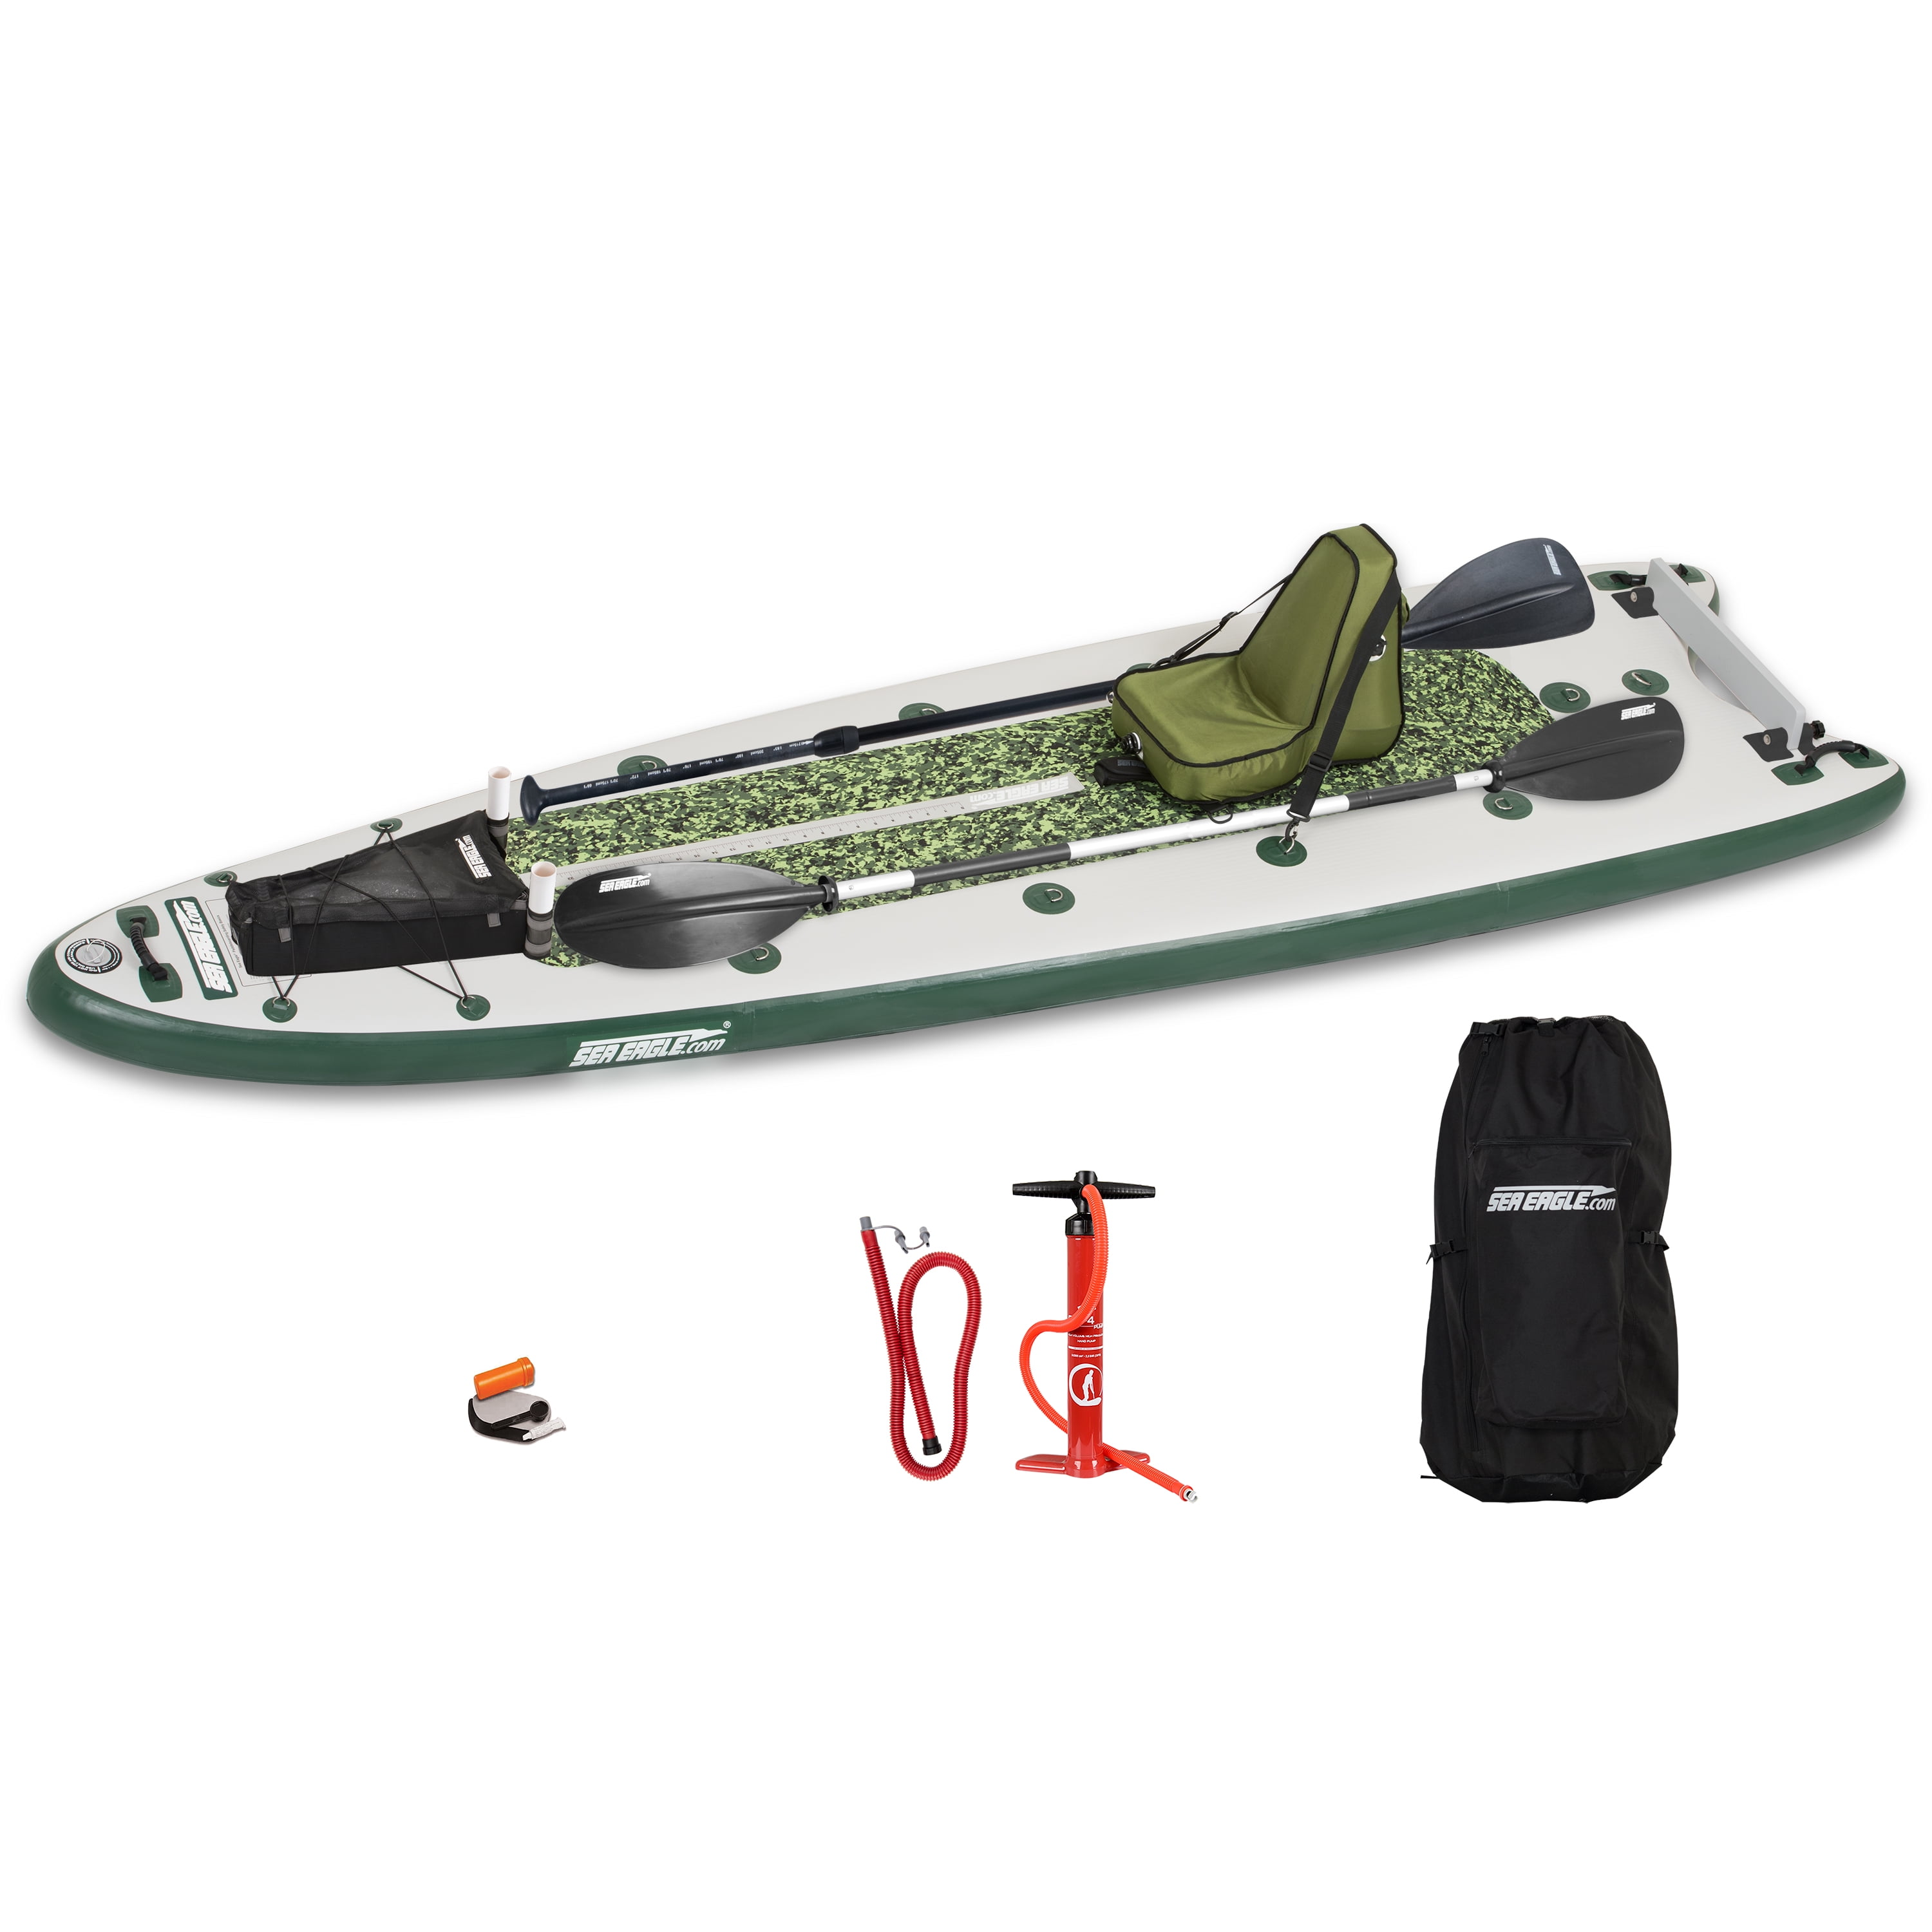 Sea Eagle FS126 12’6” Inflatable FishSUP Fishing Stand-Up Paddleboard  w/Paddle(s), Storage Box, Pump, Removable Transom, Backpack/Optional Seat -  Sit